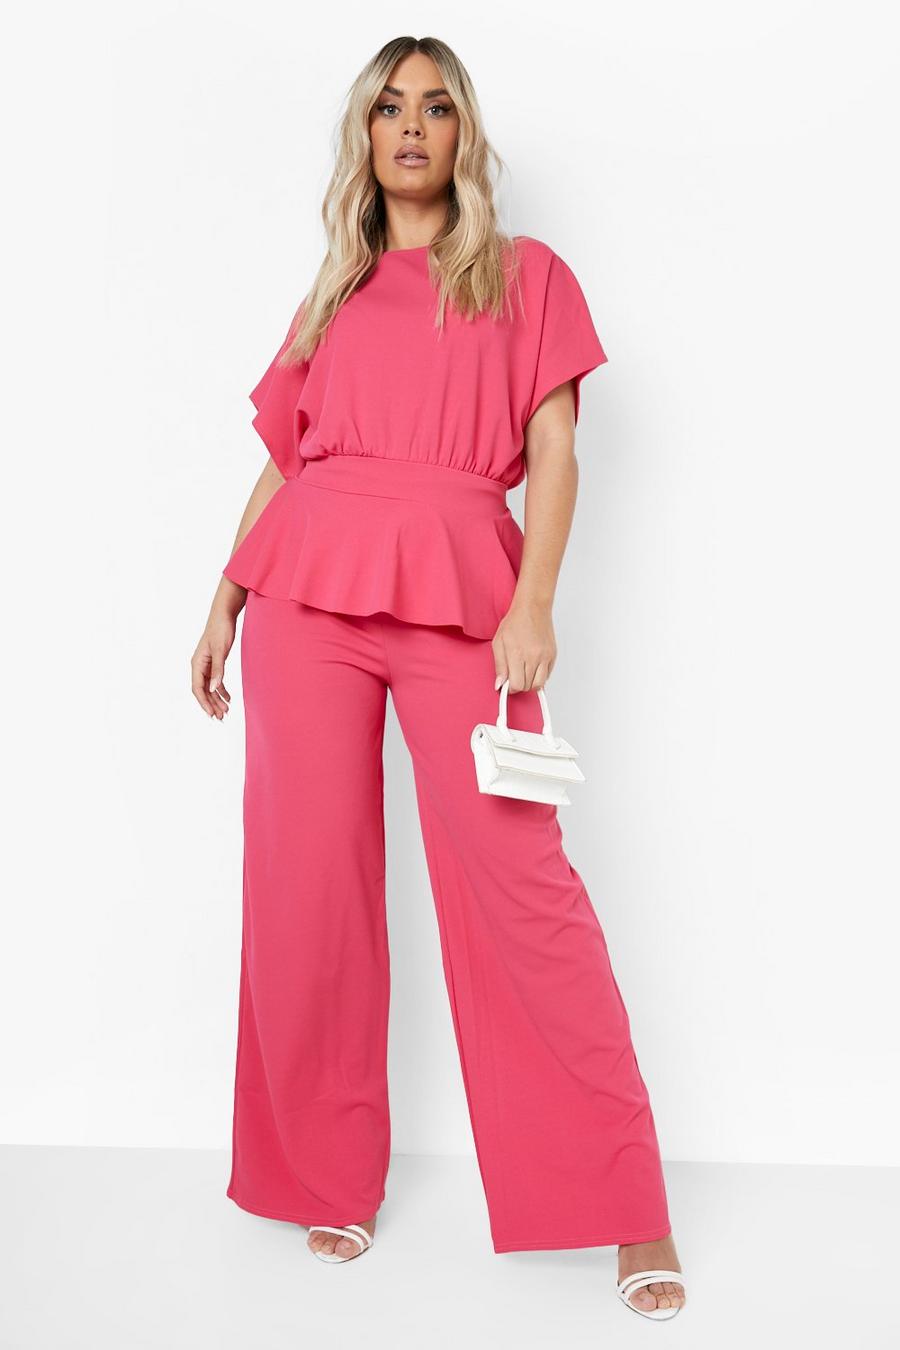 Hot pink Plus Peplum Top And Wide Leg Pants Co-Ord